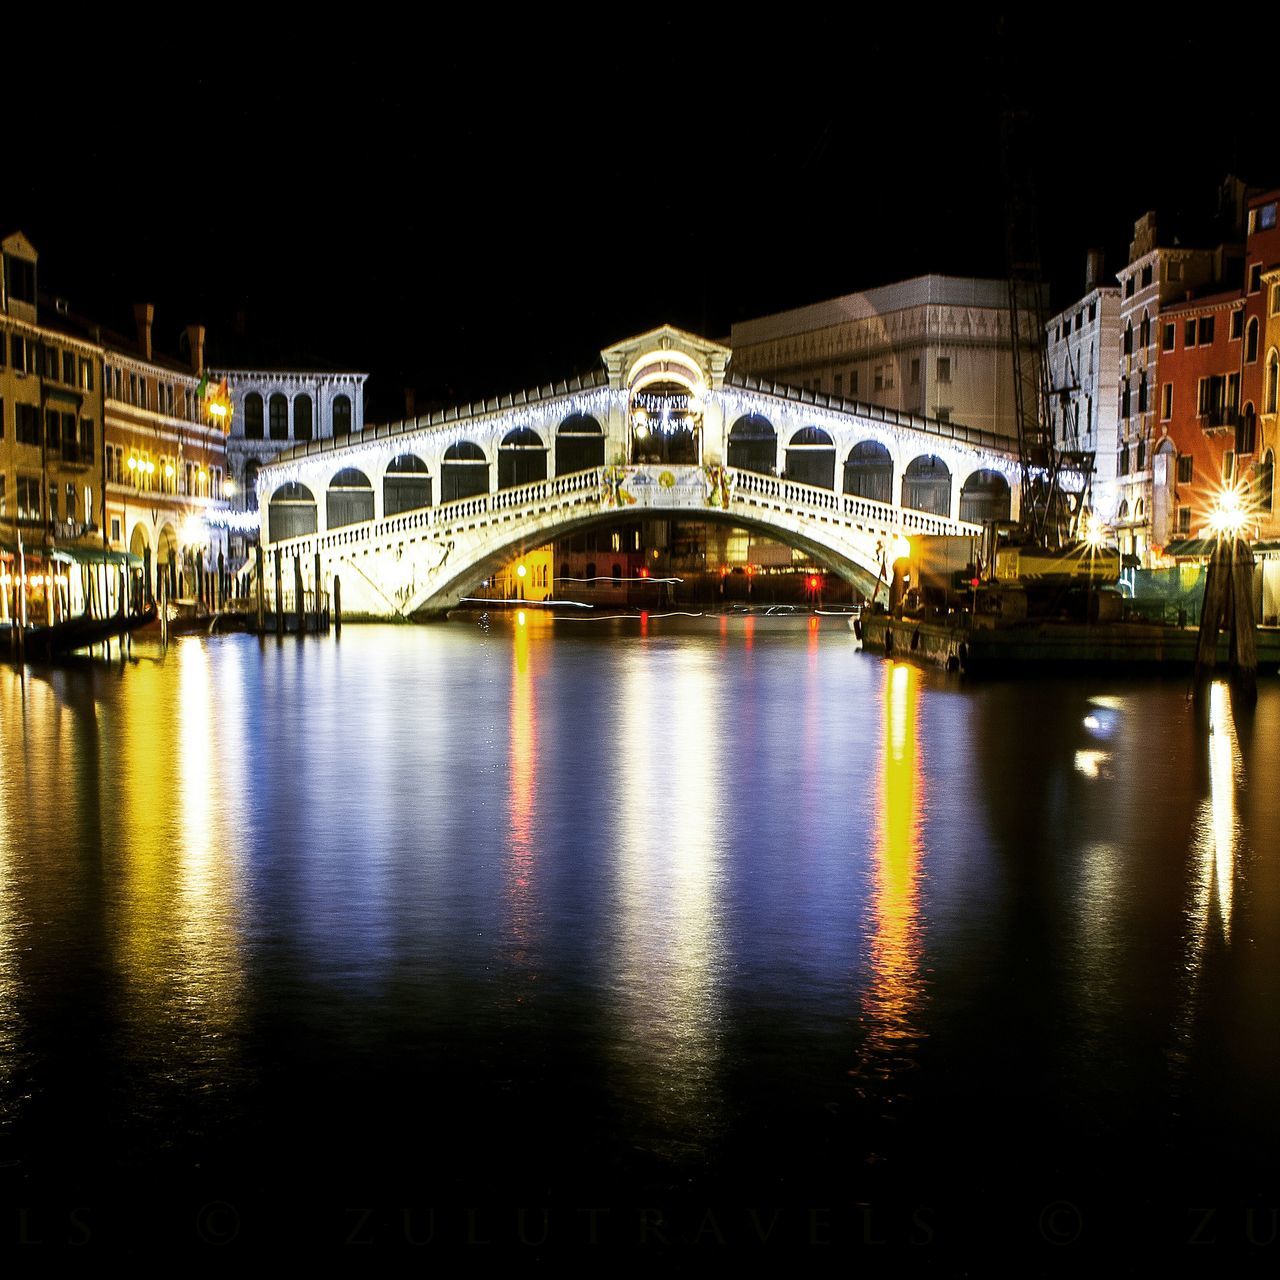 architecture, built structure, illuminated, water, night, building exterior, reflection, river, arch, bridge - man made structure, connection, waterfront, arch bridge, city, travel destinations, bridge, famous place, canal, clear sky, travel